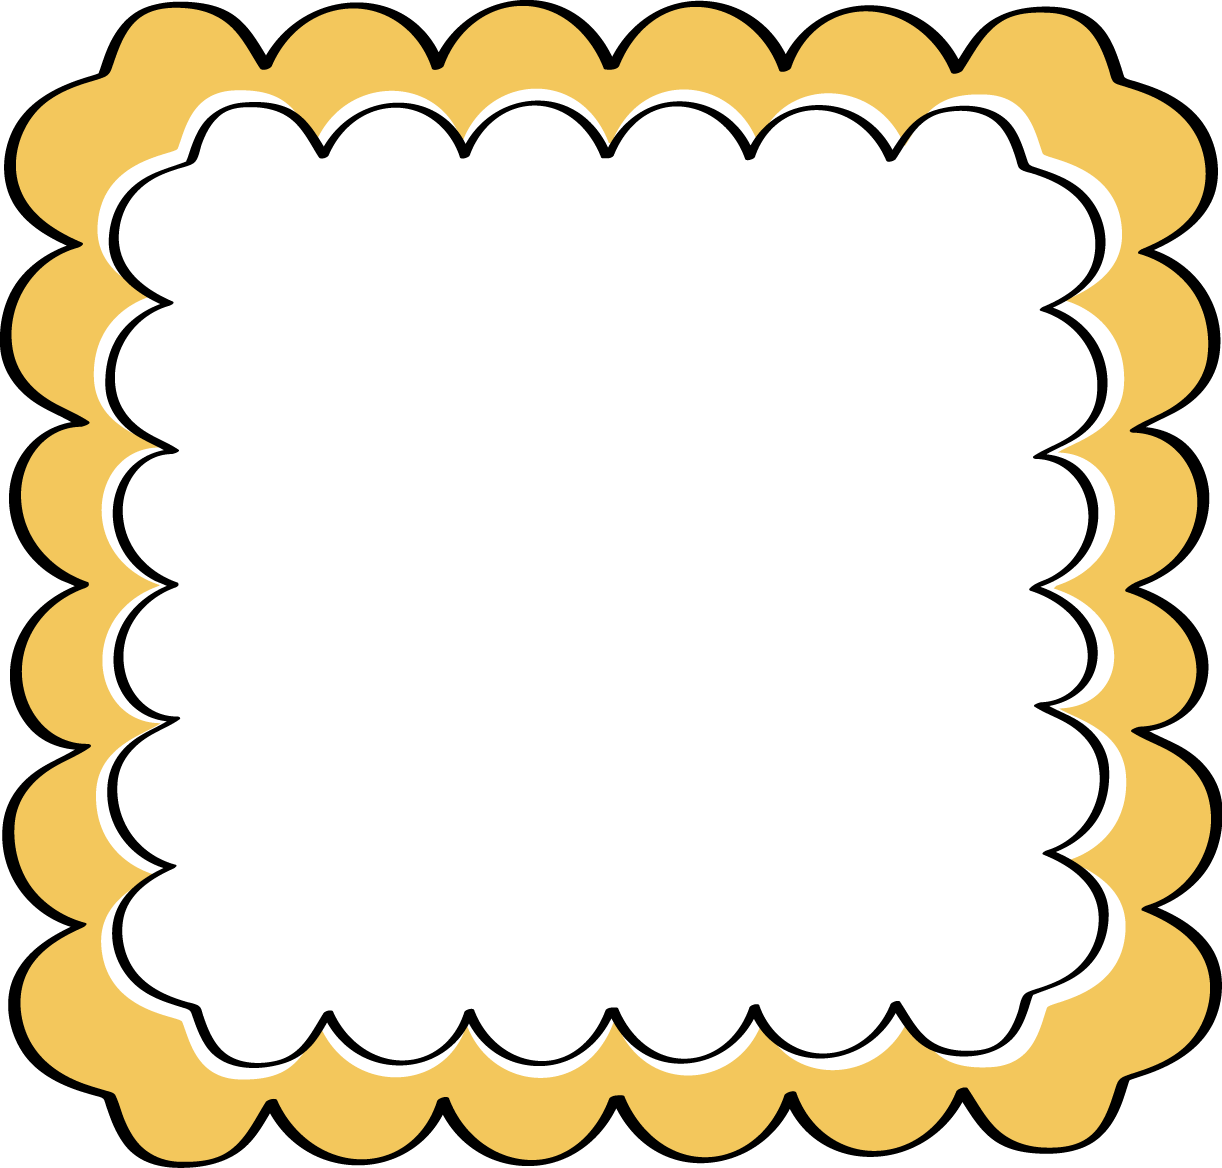 yellow frame clipart - photo #25